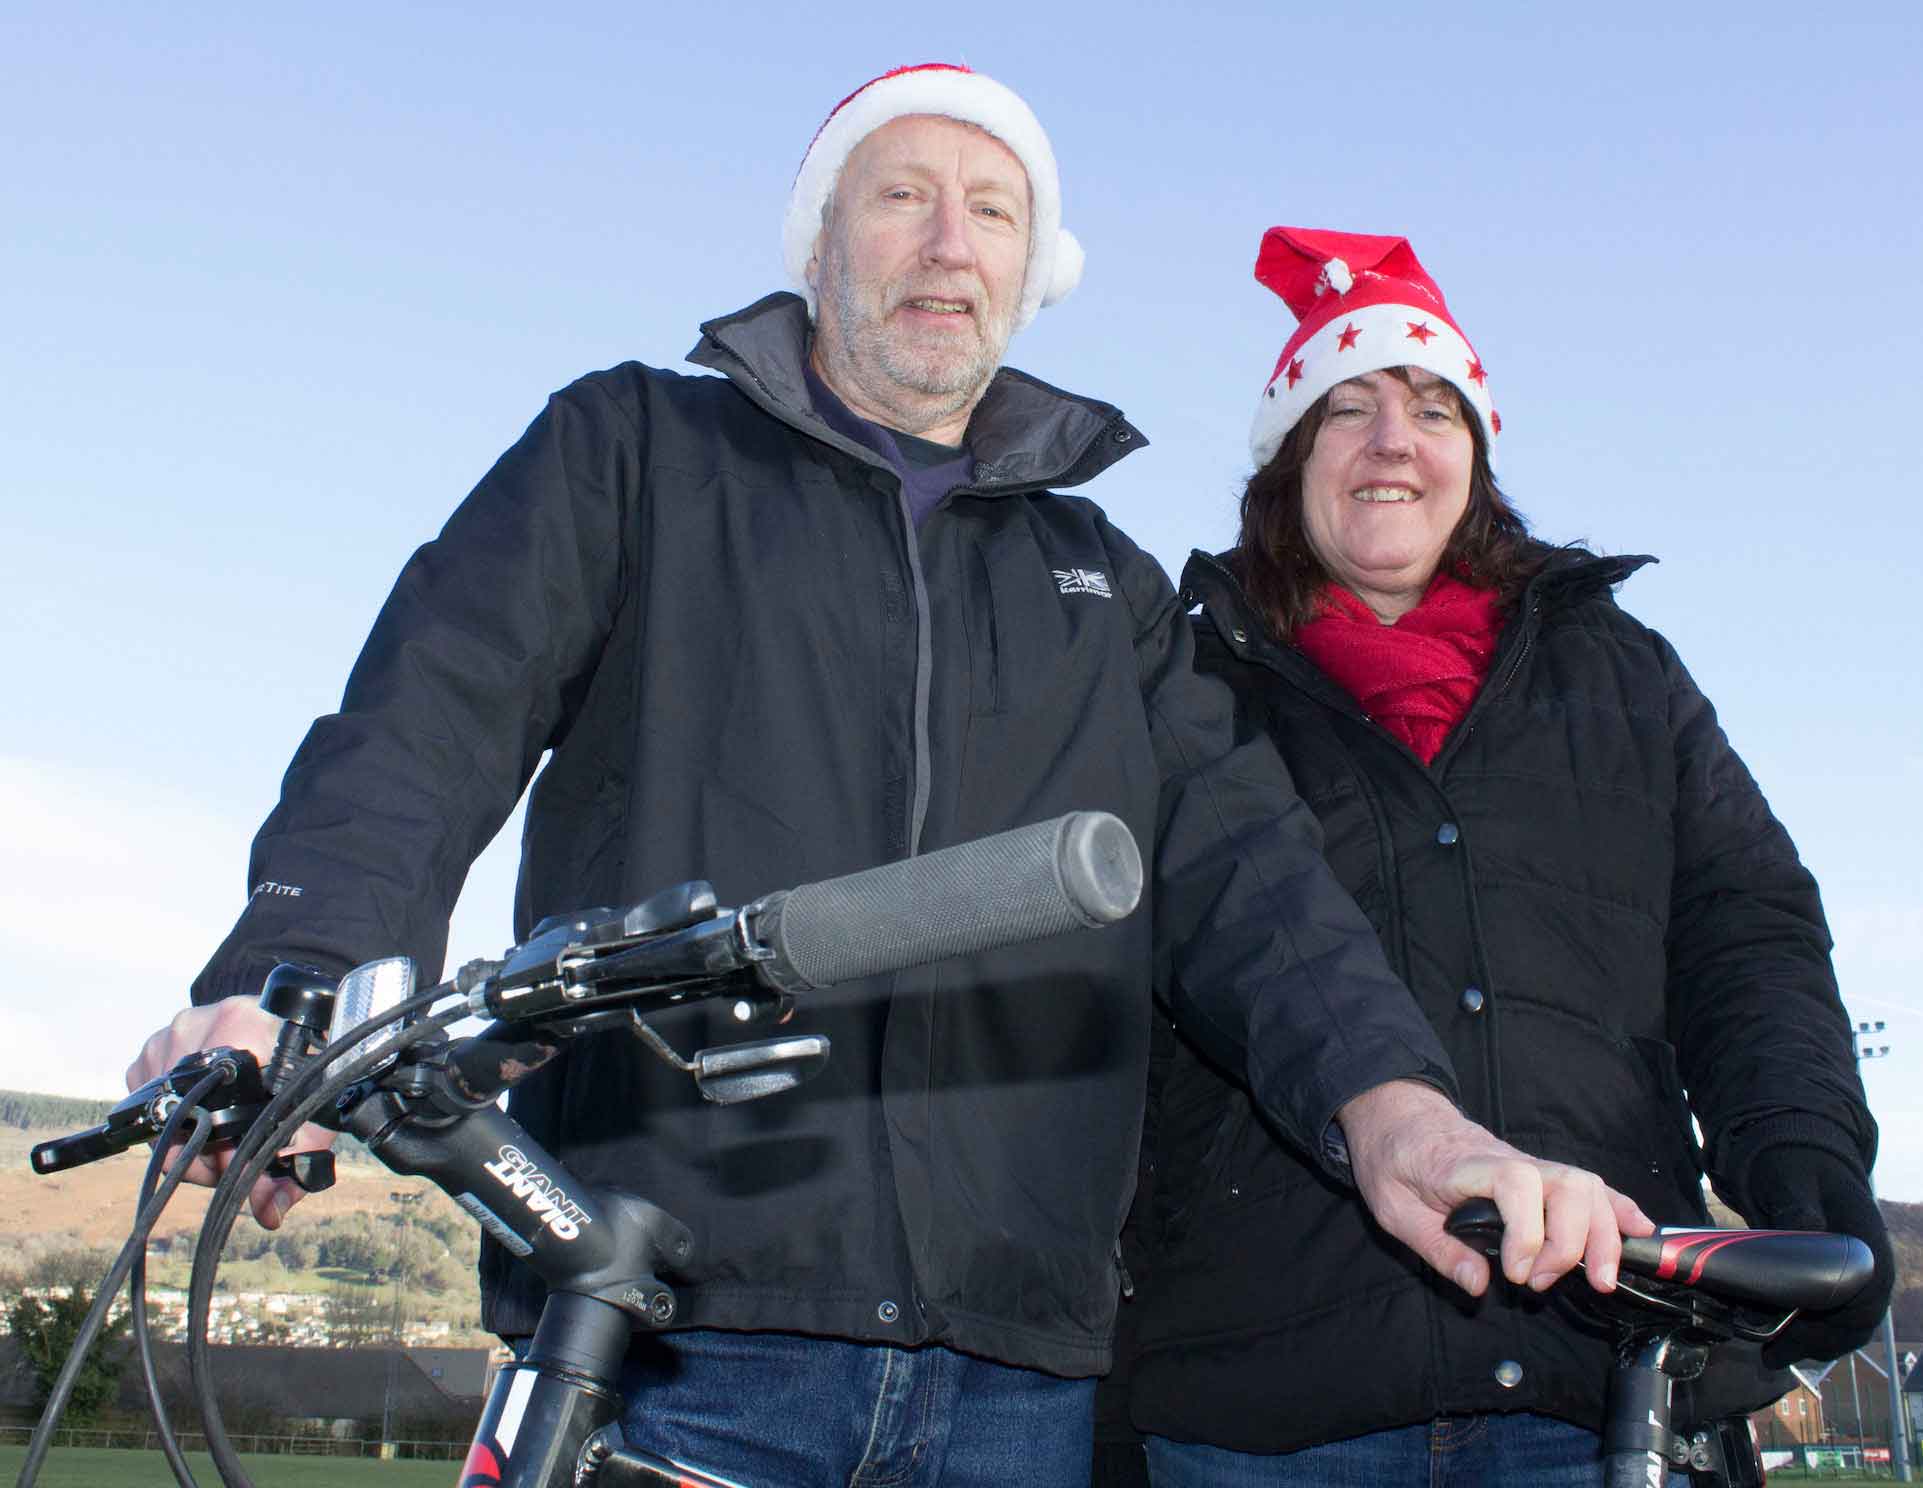 Resilient Foster Care gets set for Santa Cycle ride in aid of Cynon Valley Pals